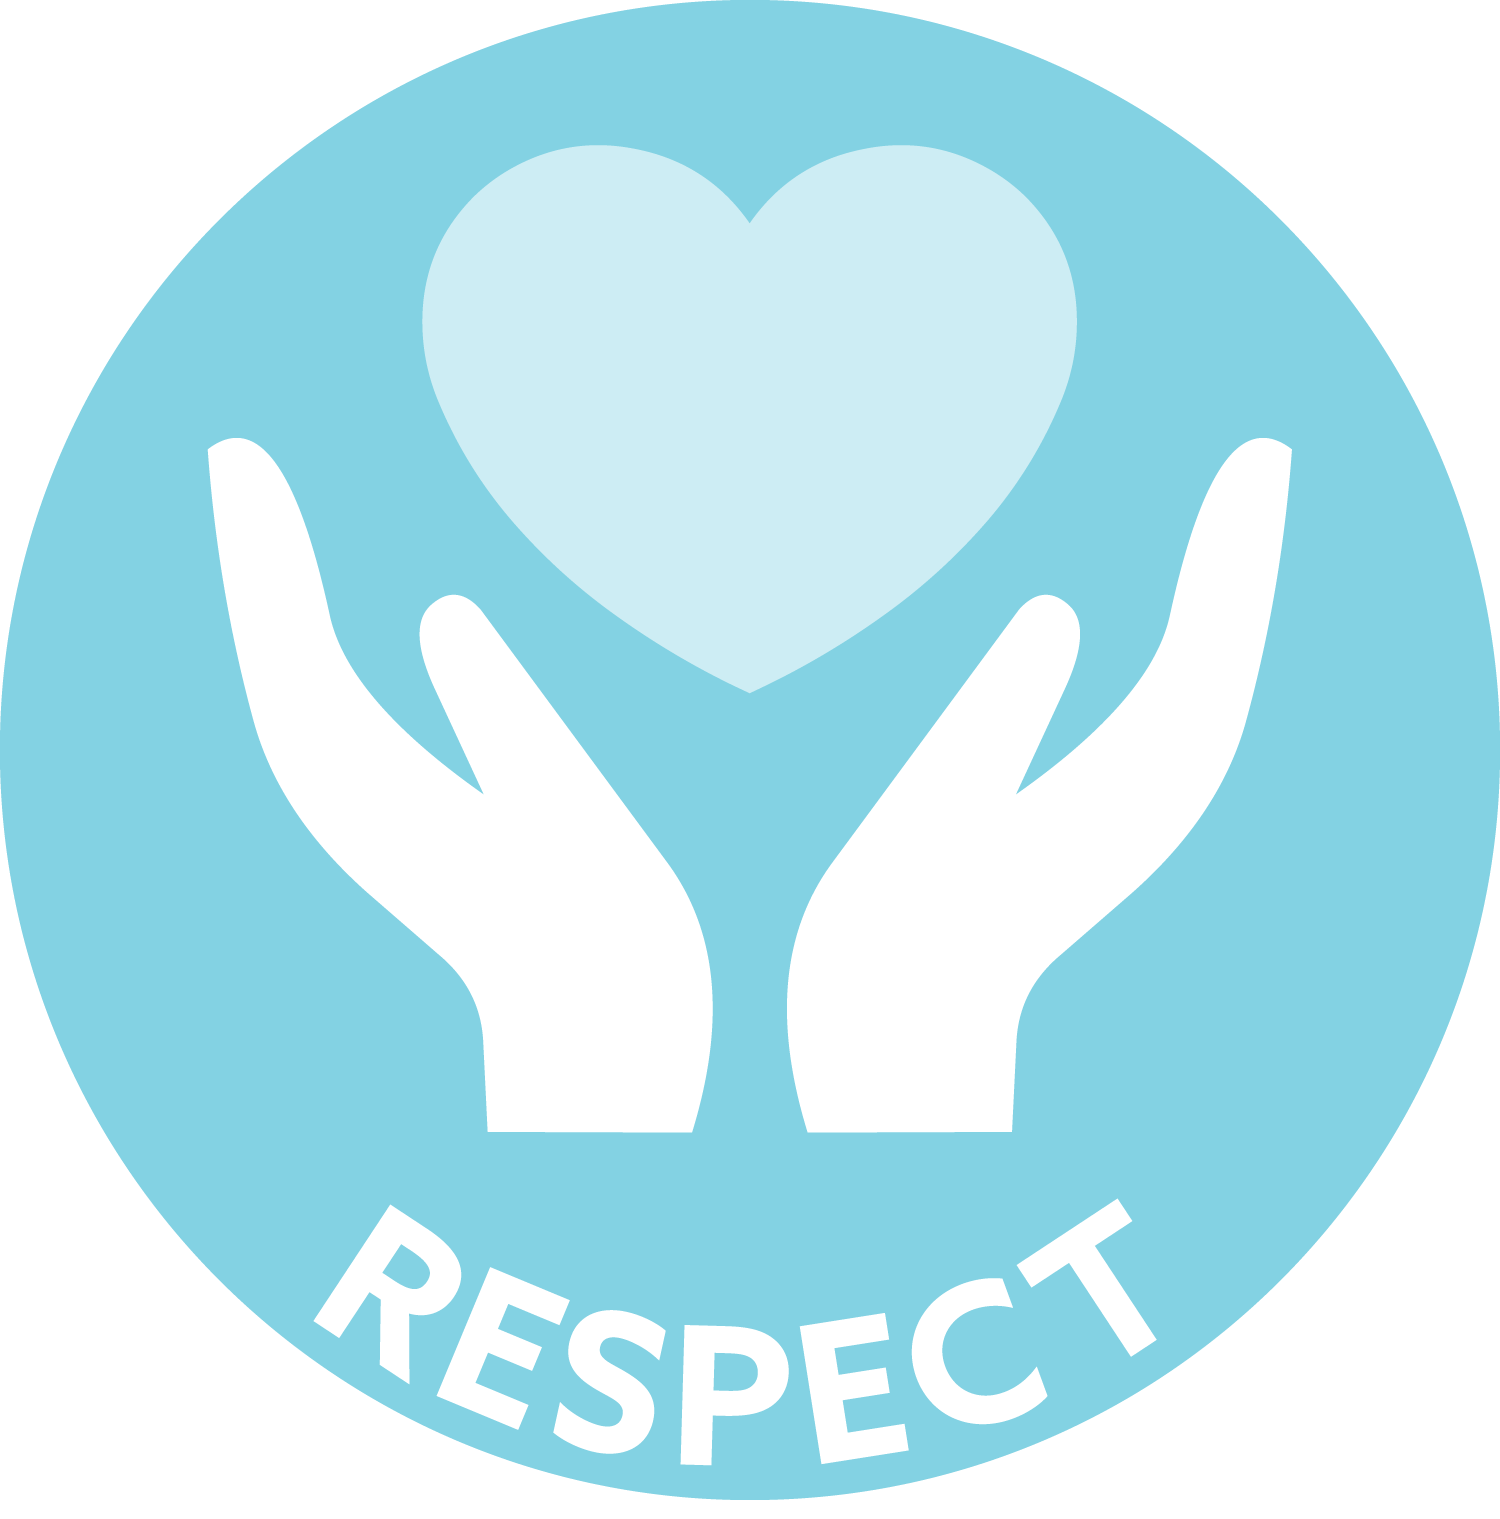 Respect: icon of two hands holding a heart